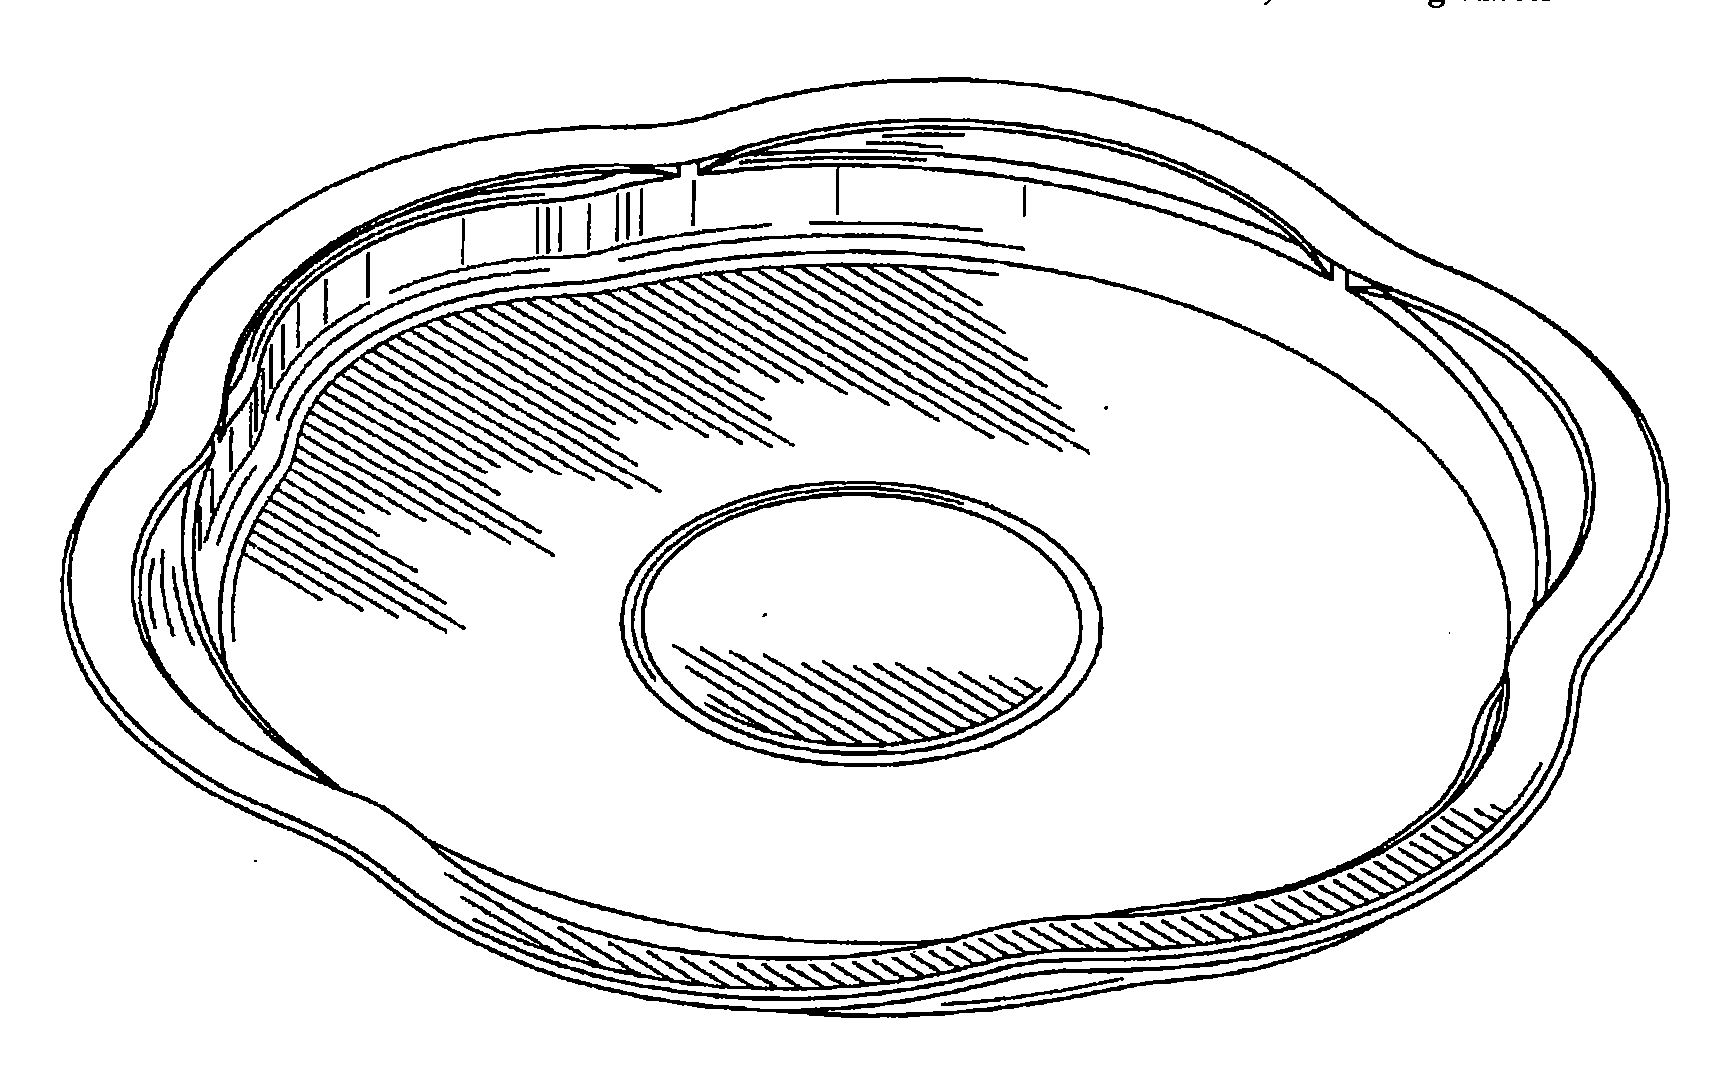 Example of a design for a lazy susan.
